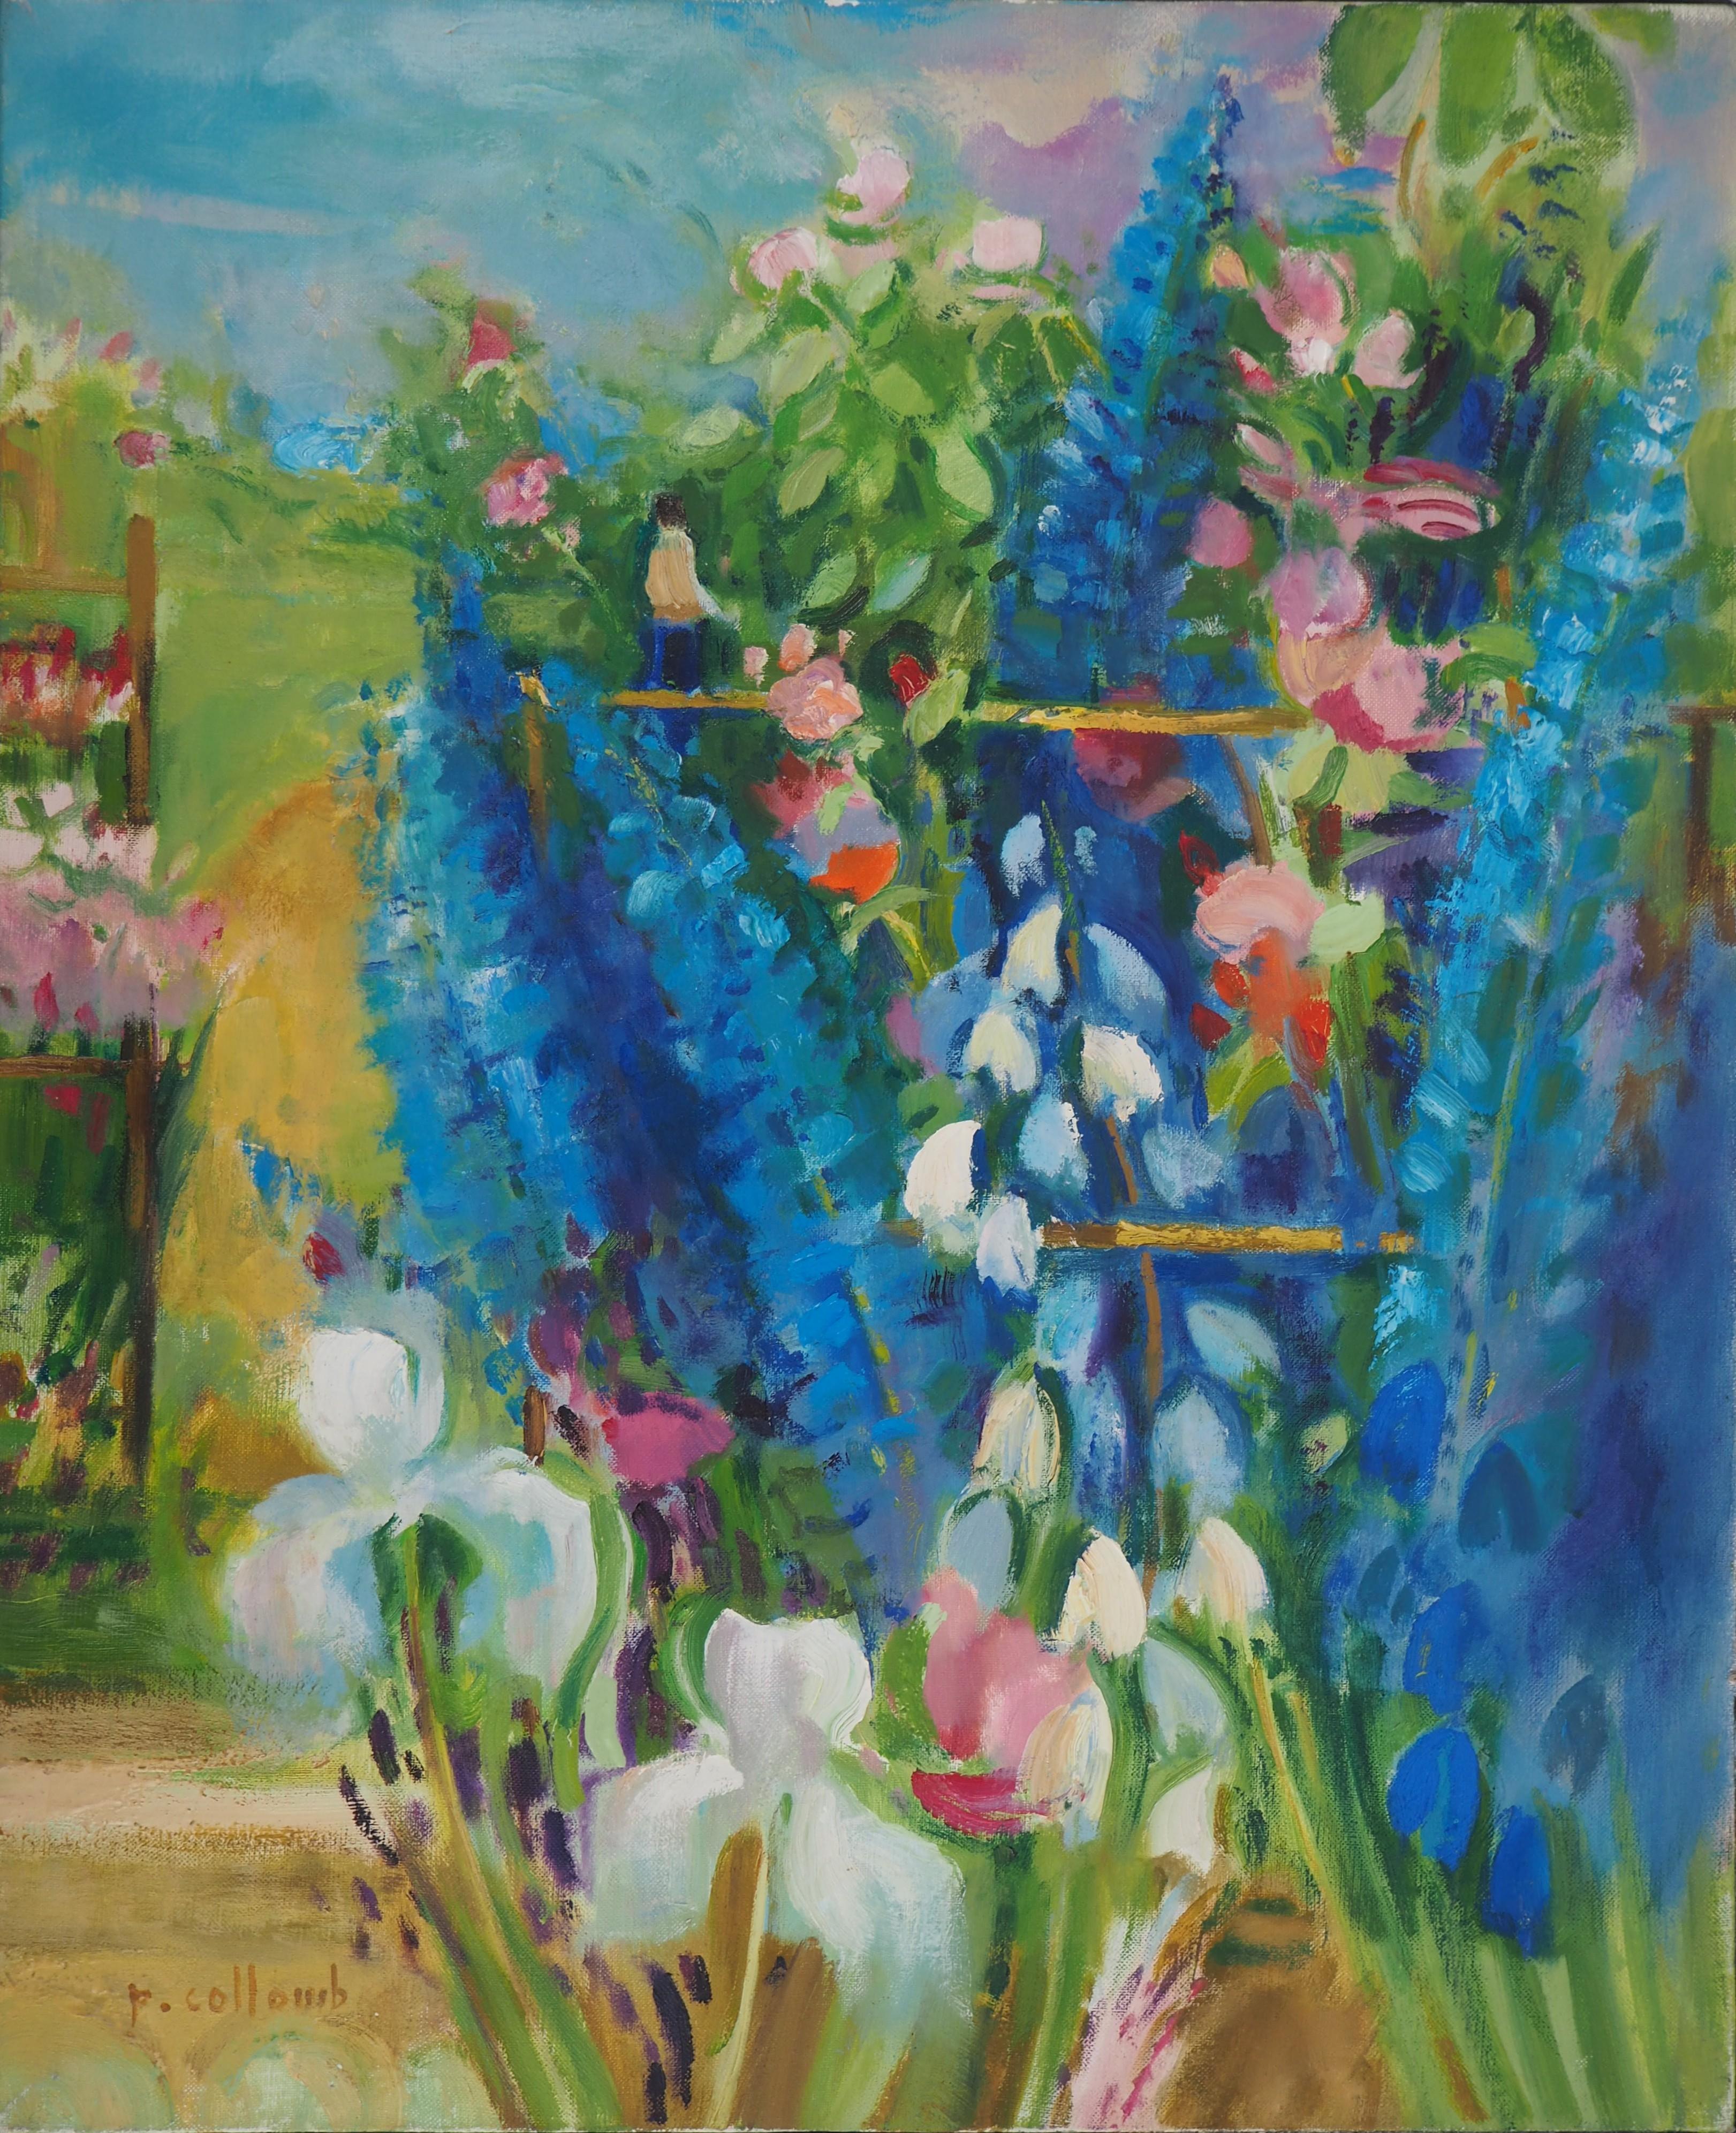 Paul Collomb Landscape Painting - Garden : White Irises and Delphiniums - Original Oil Painting, Handsigned